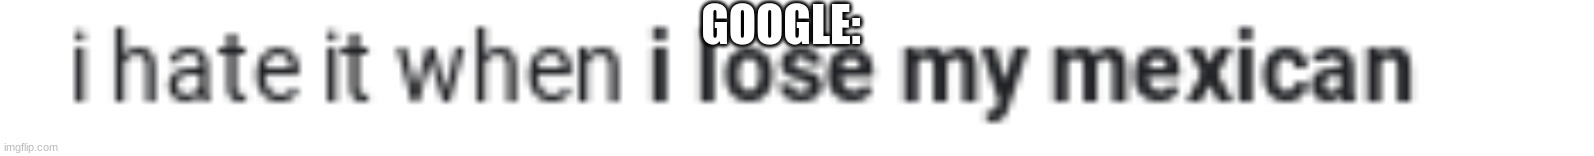 google pog | GOOGLE: | image tagged in google search,pogchamp,i hate it when | made w/ Imgflip meme maker